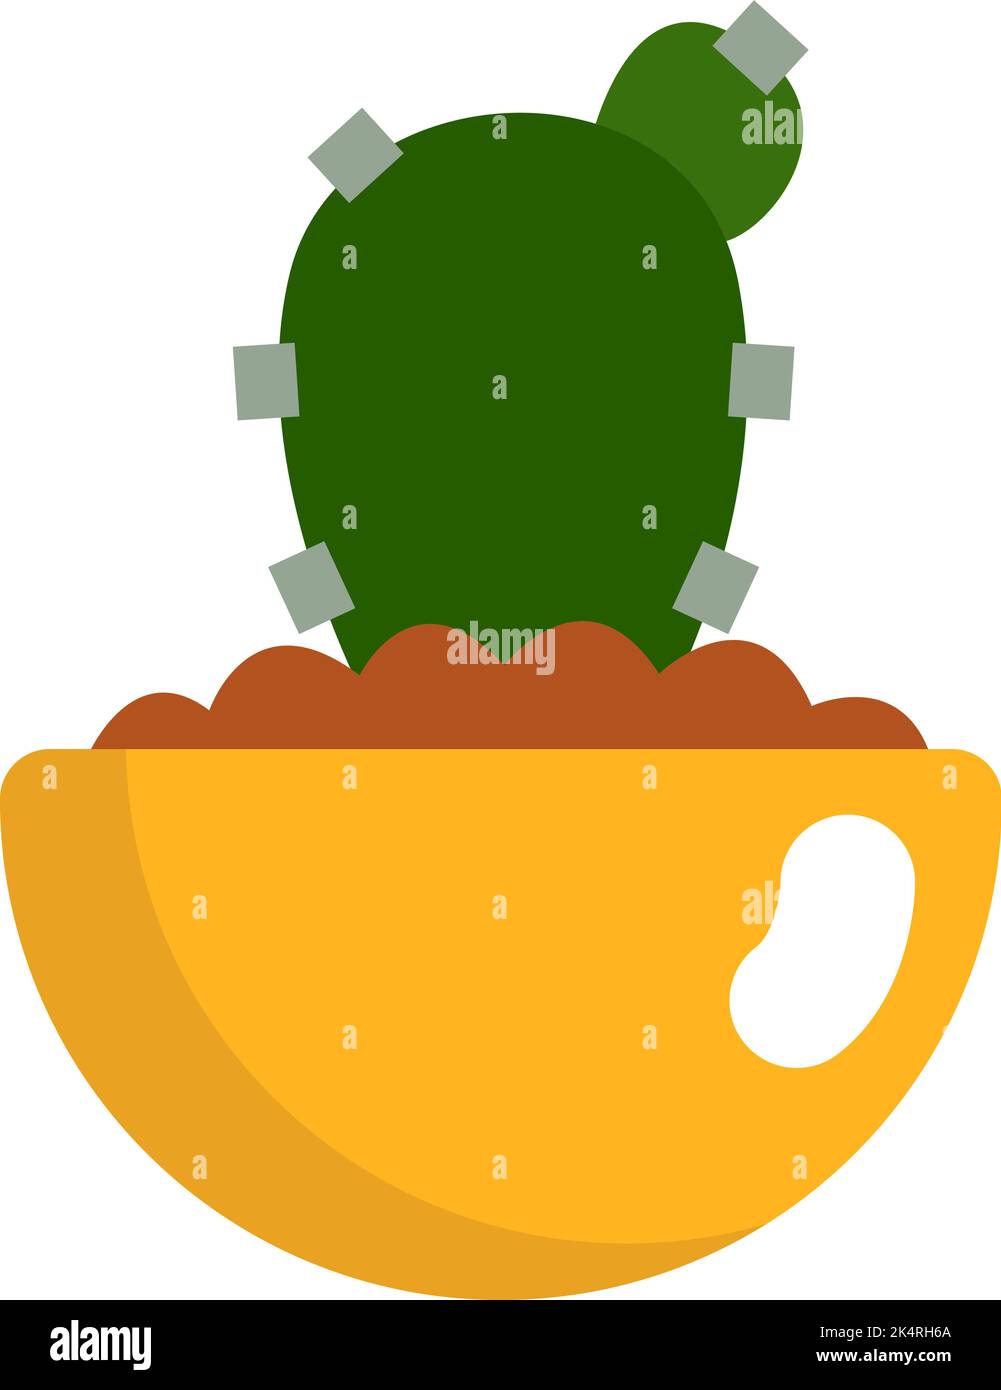 Peyote cactus, illustration, vector on a white background. Stock Vector